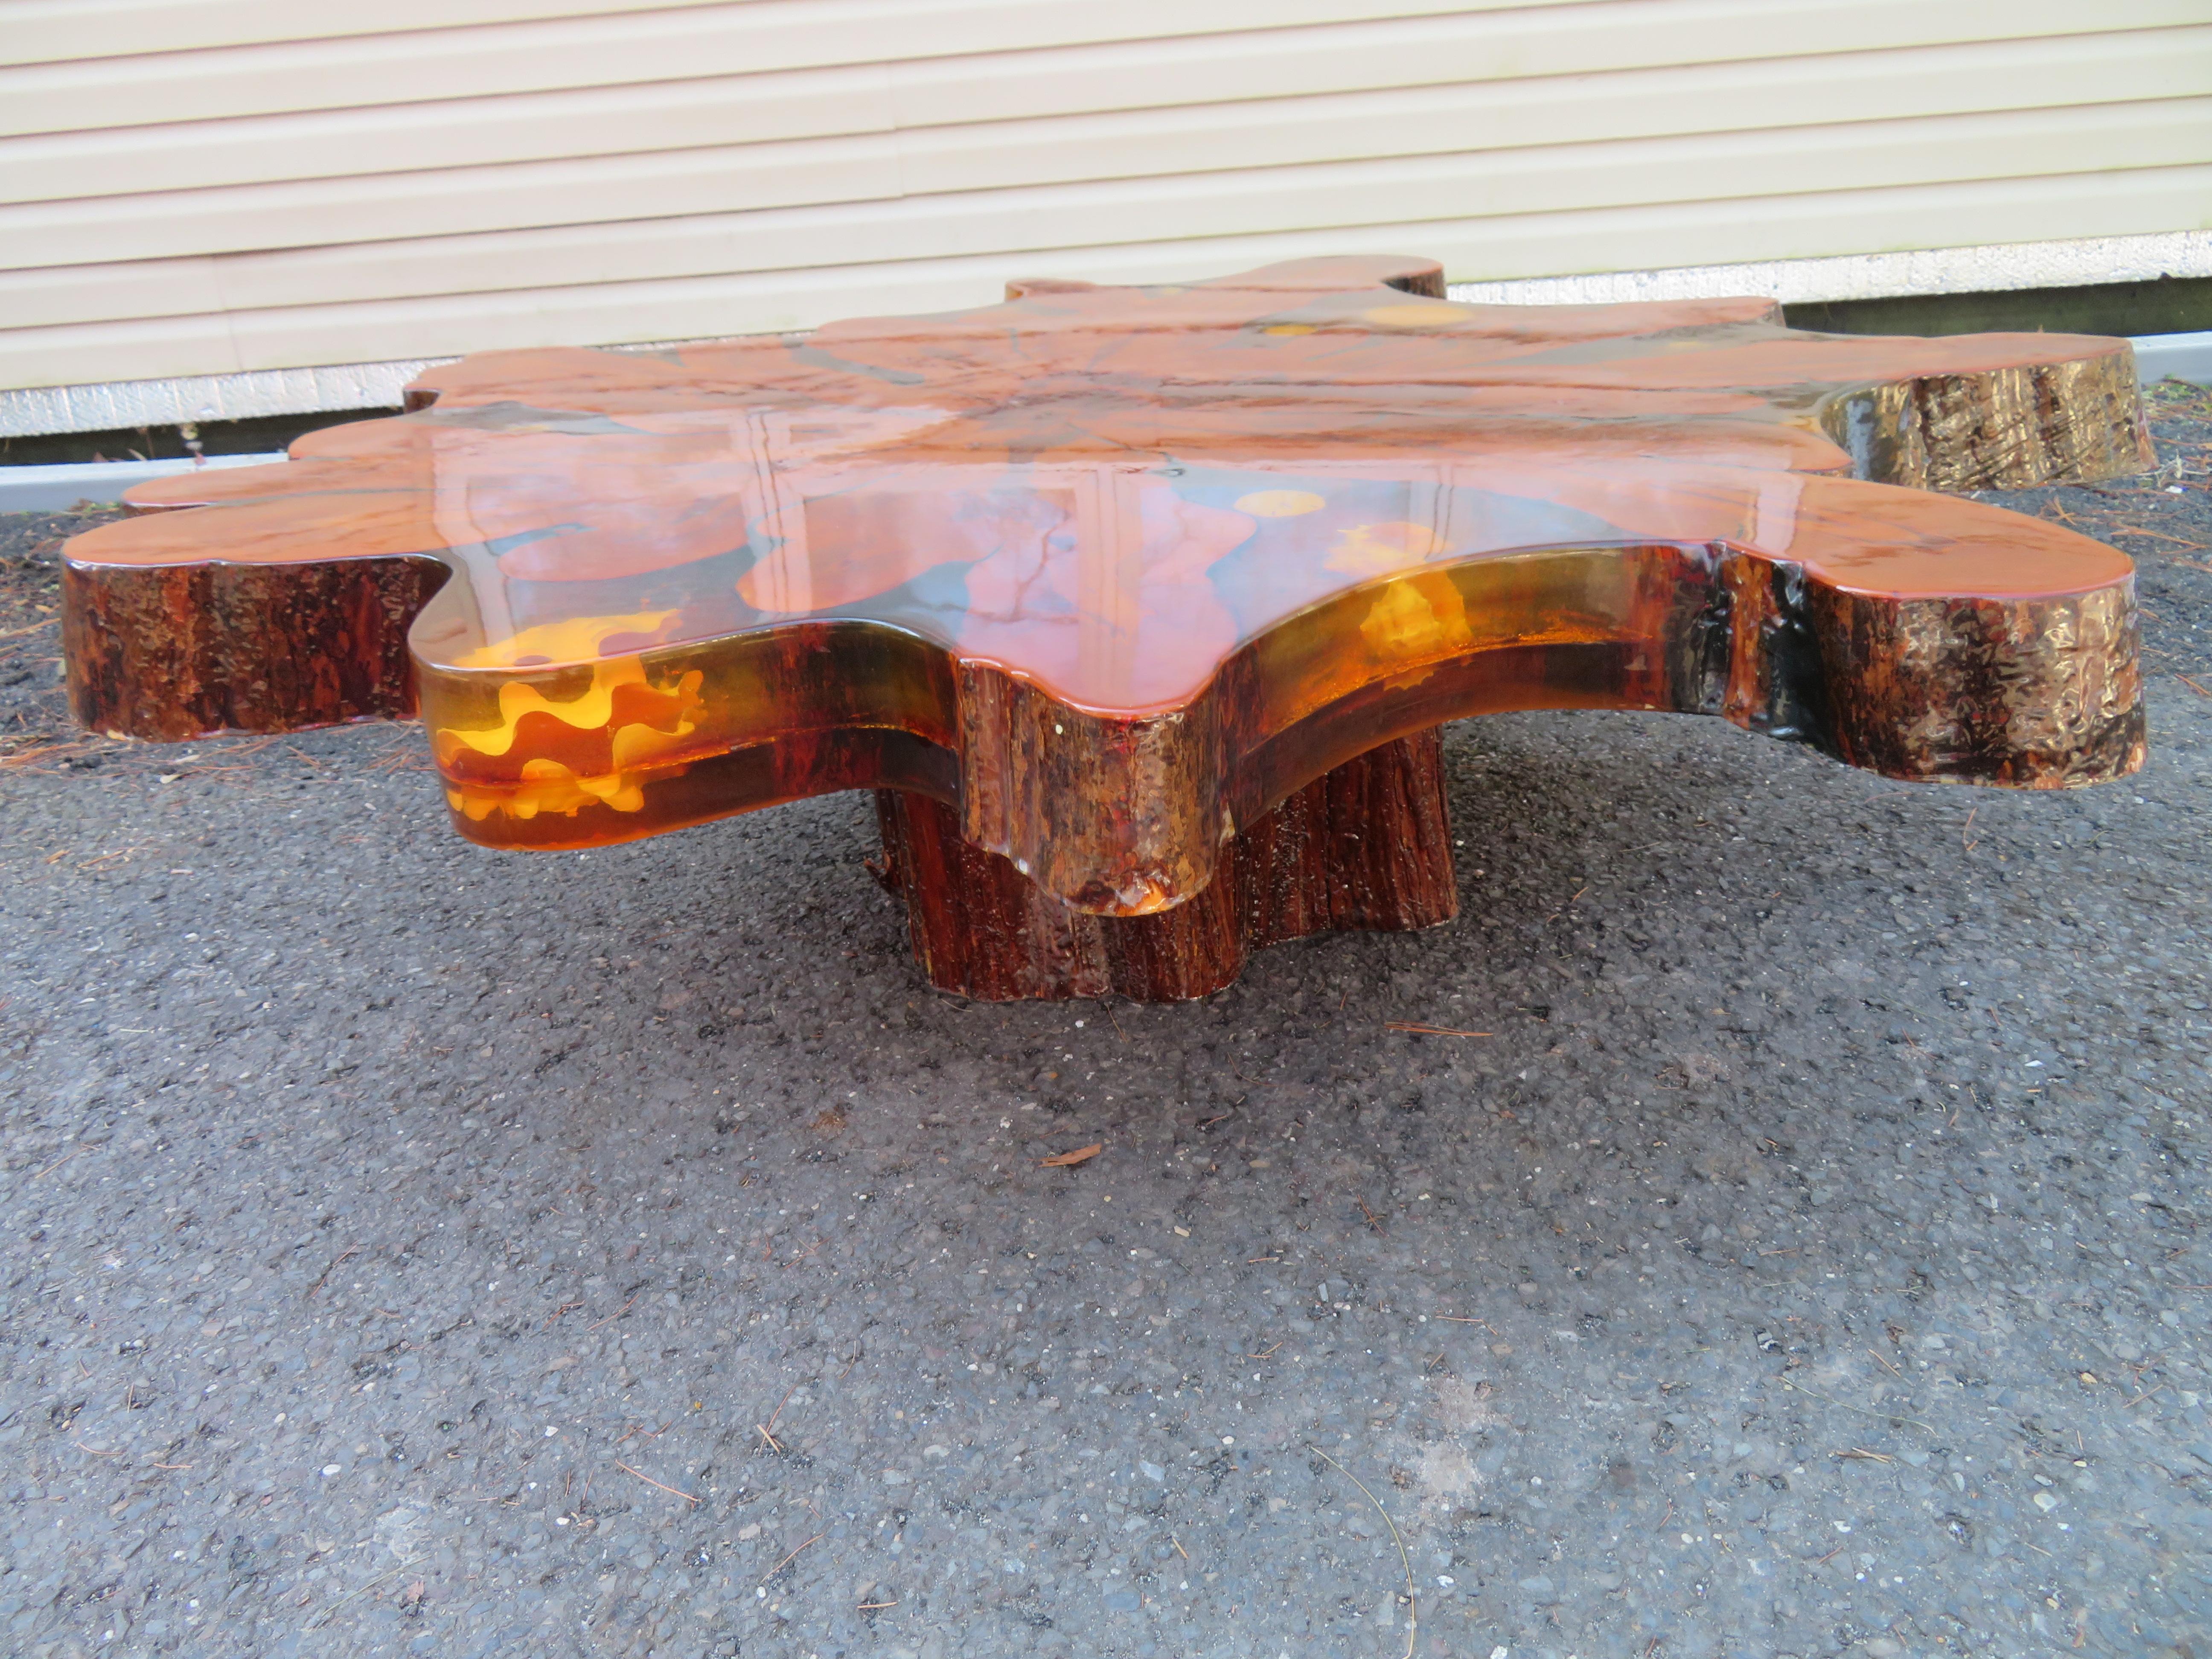 Magical live edge cypress slab coffee table with embedded seashells. This table is drop-dead gorgeous and would be perfect in a beach house setting. There are wonderful seashells embedded within a 5